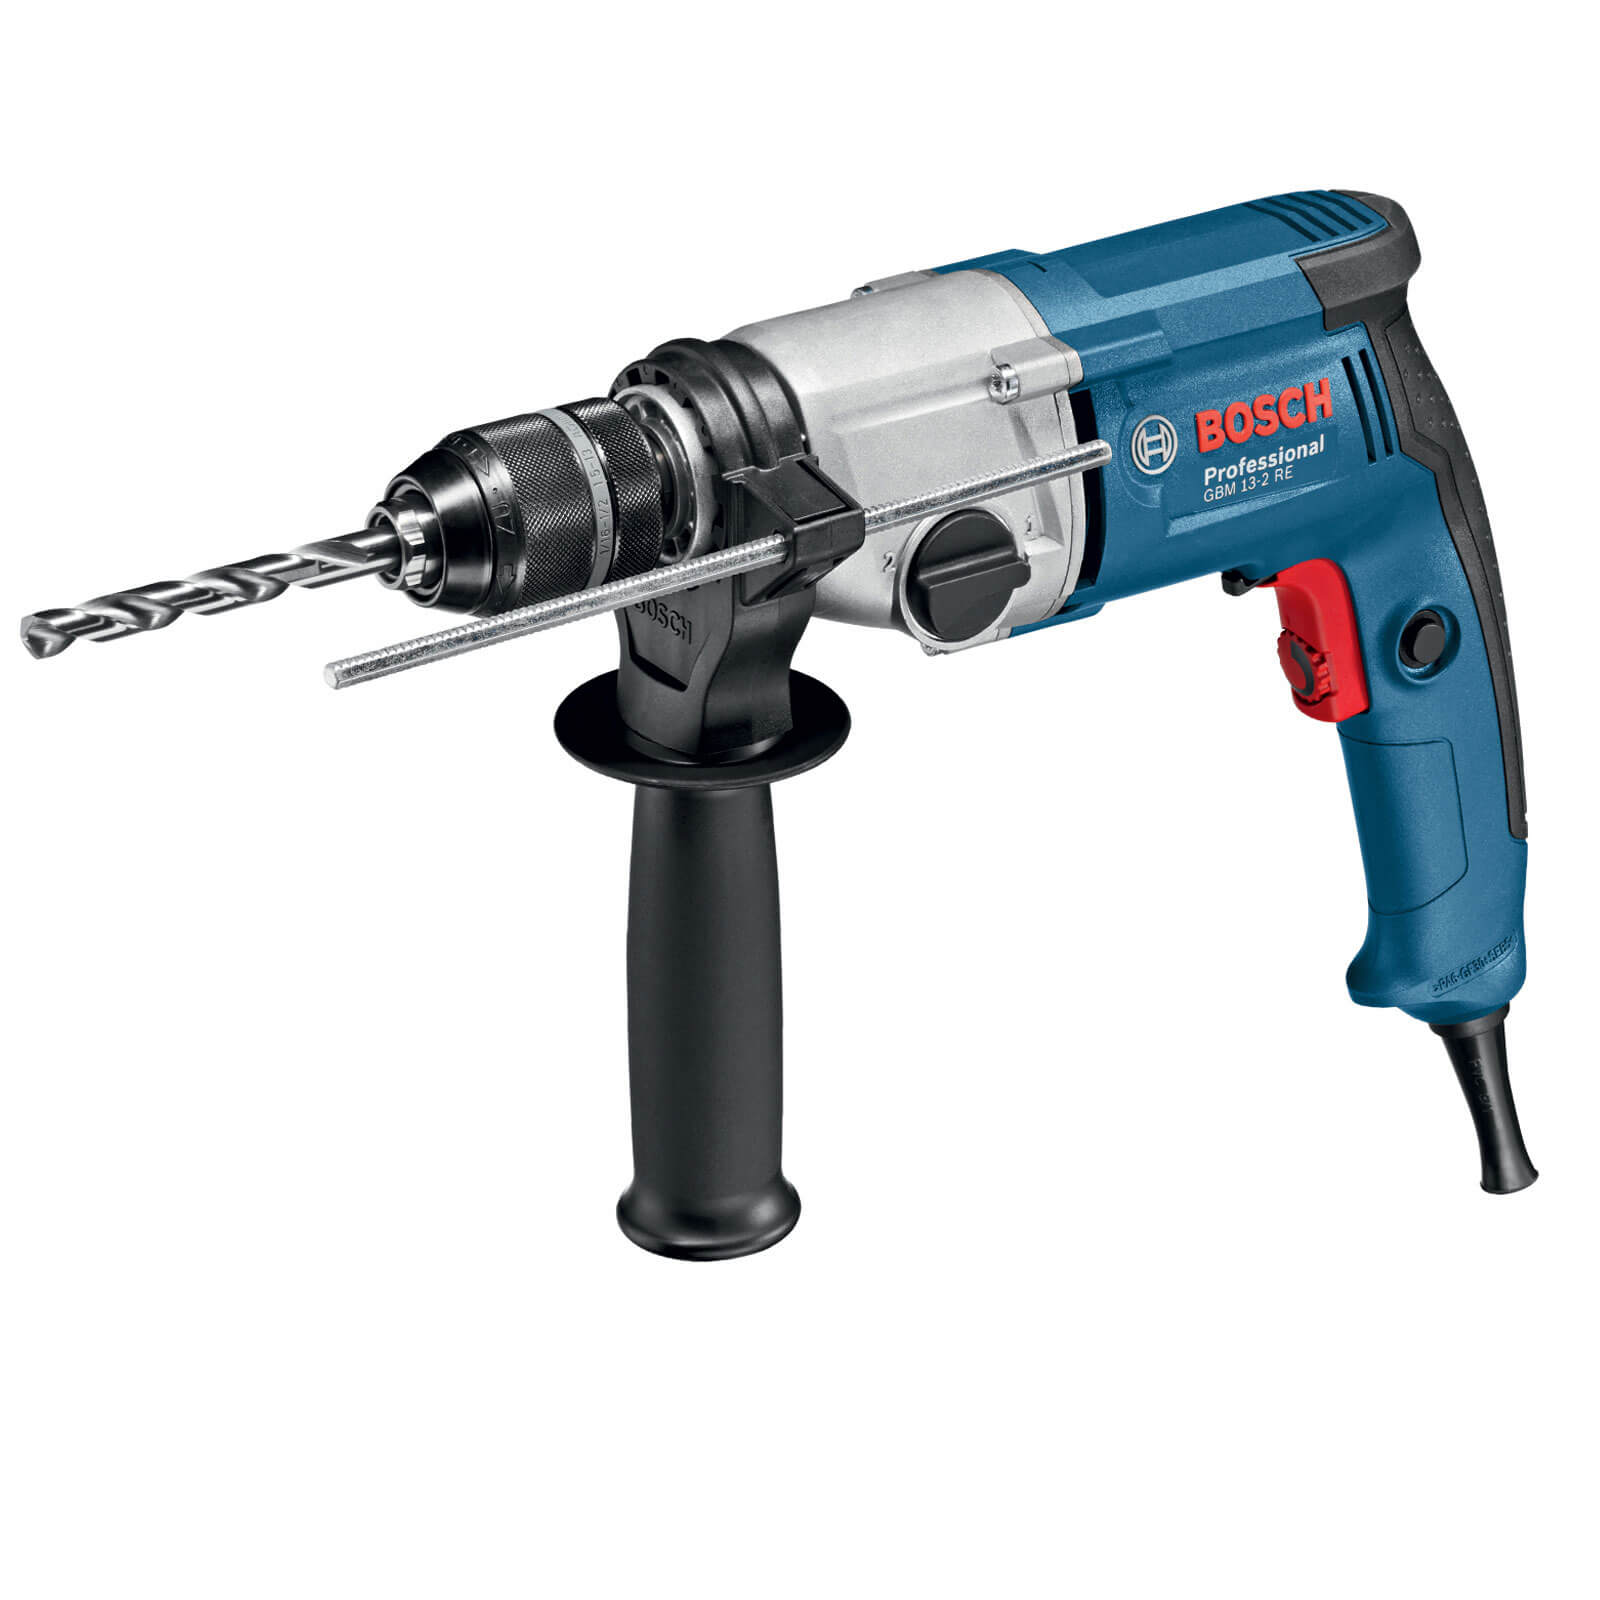 Image of Bosch GBM 13-2 RE Rotary Drill 240v